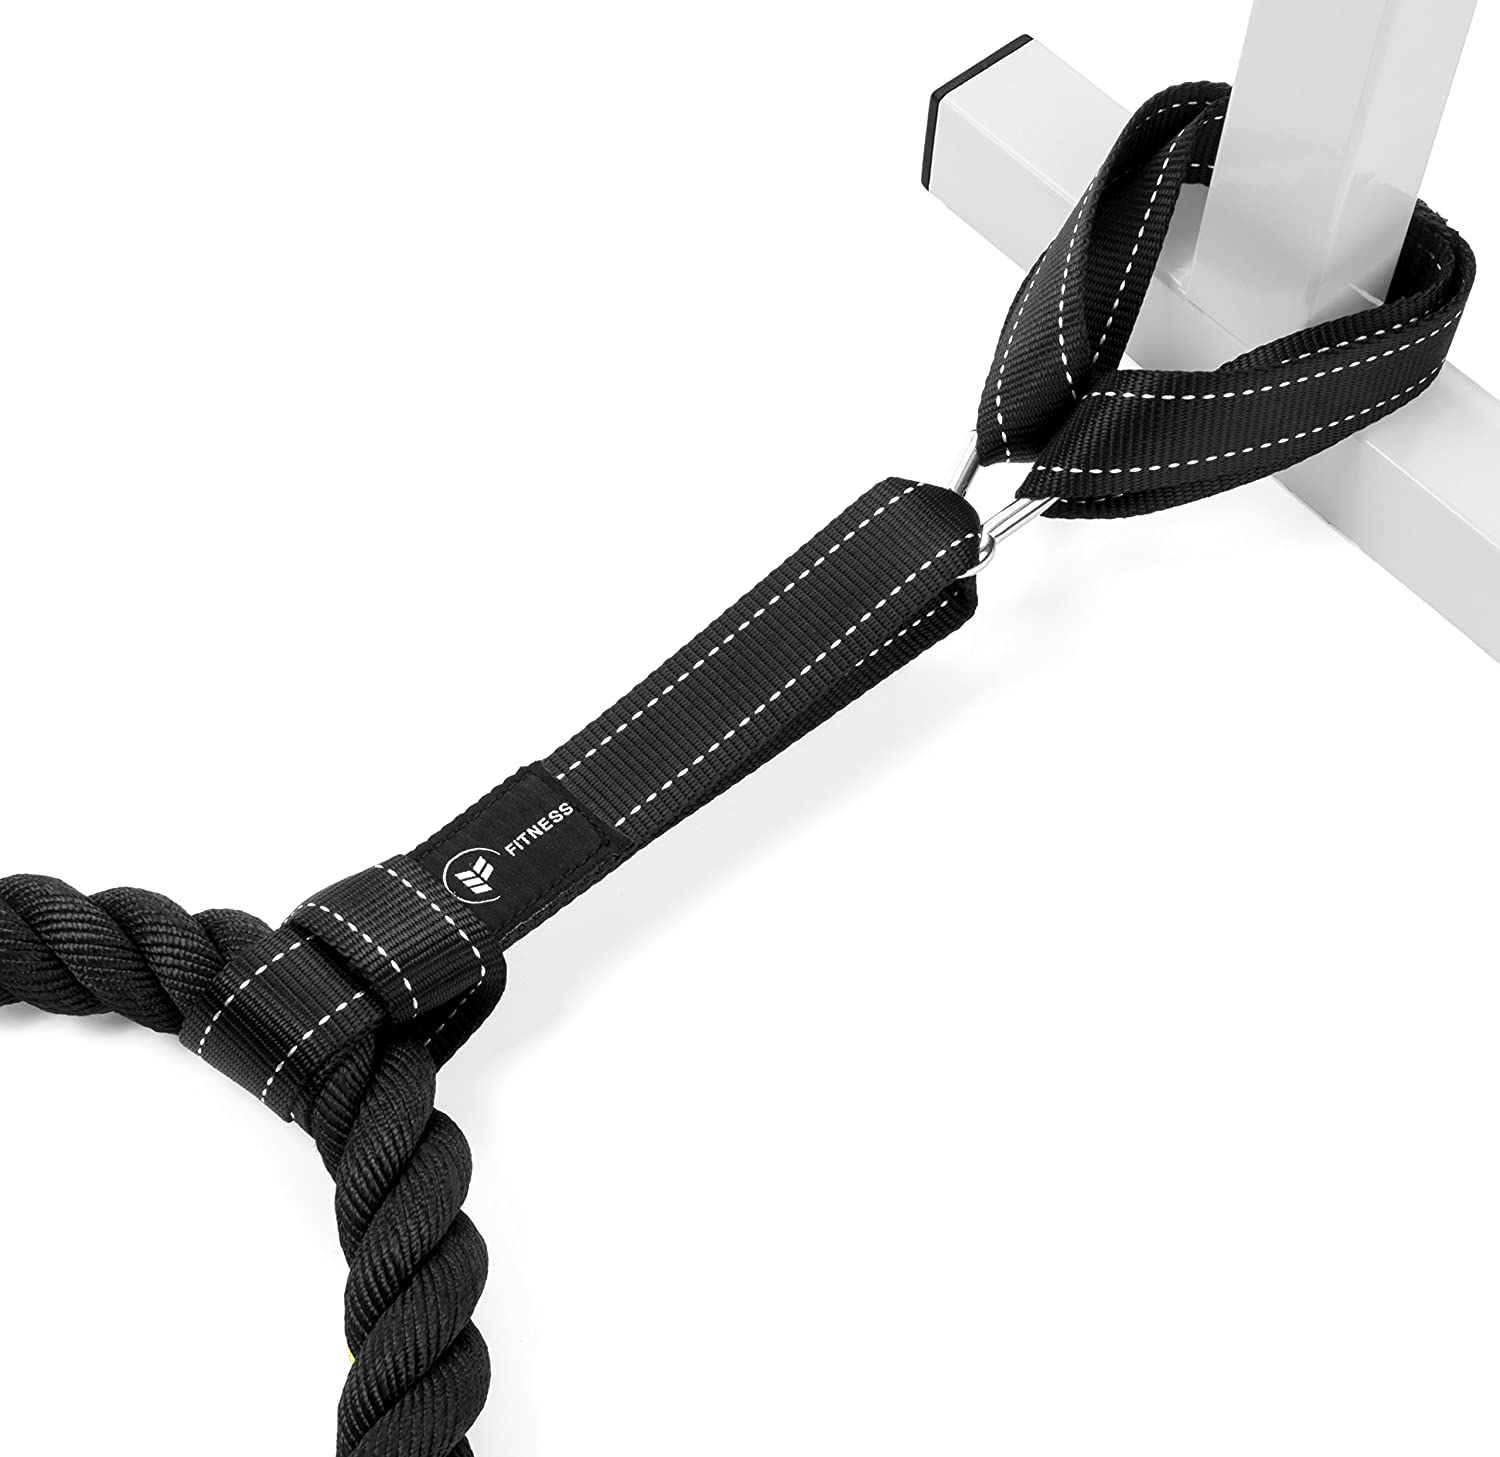 Battle Rope Anchor Strap Kit | Heavy Duty Reinforced Nylon | Easy and Fast Setup | Stops Rope Damage | Stainless Steel Carabiner | Includes Exercise Guide |